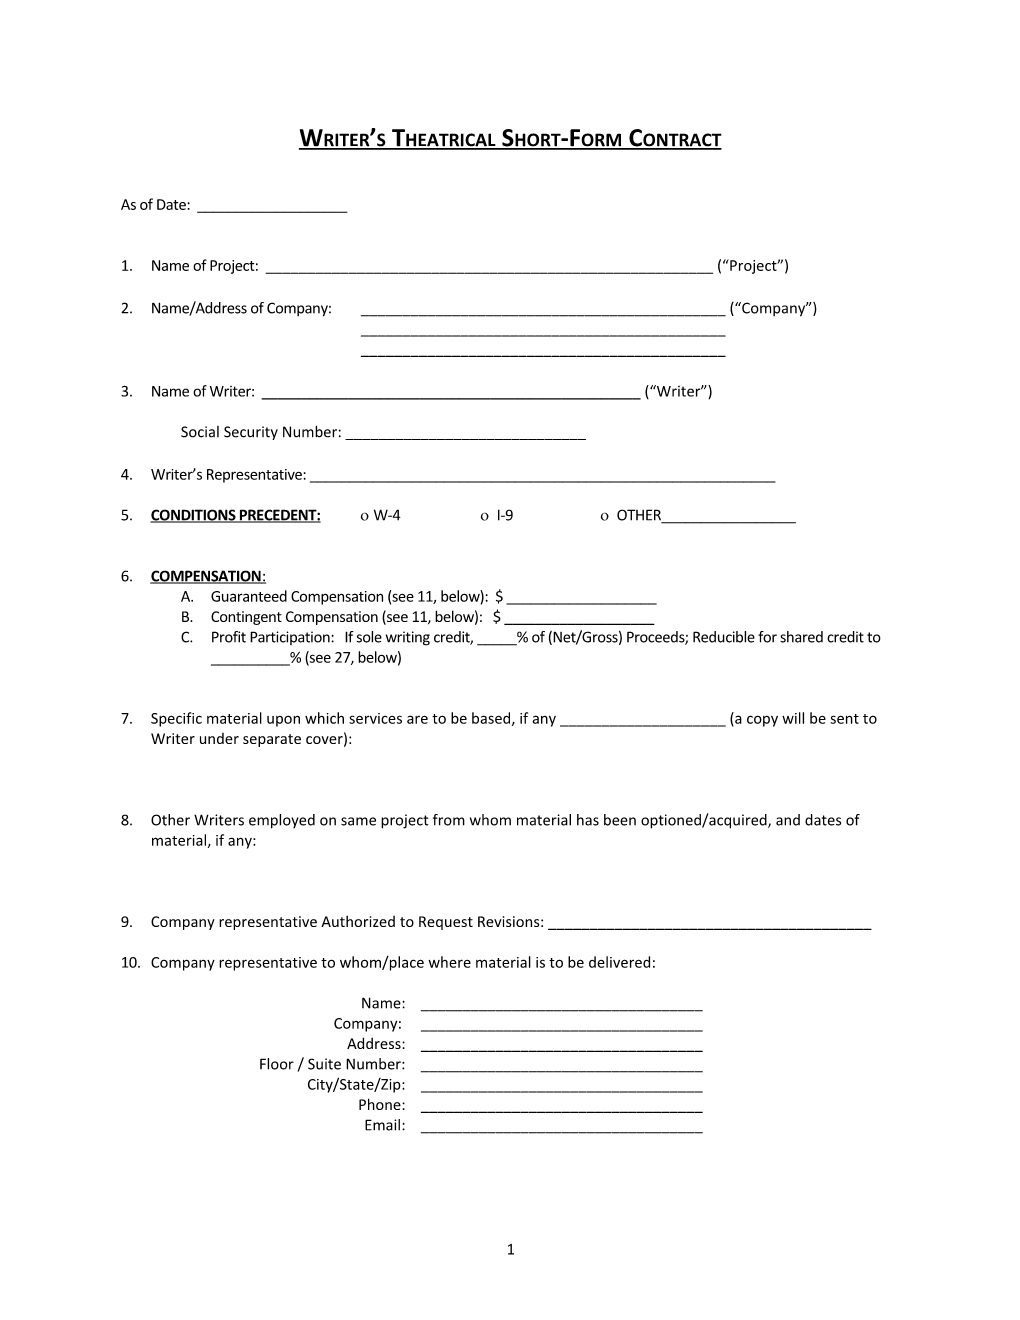 Writers Theatrical Short-Form Contract (For Employees)